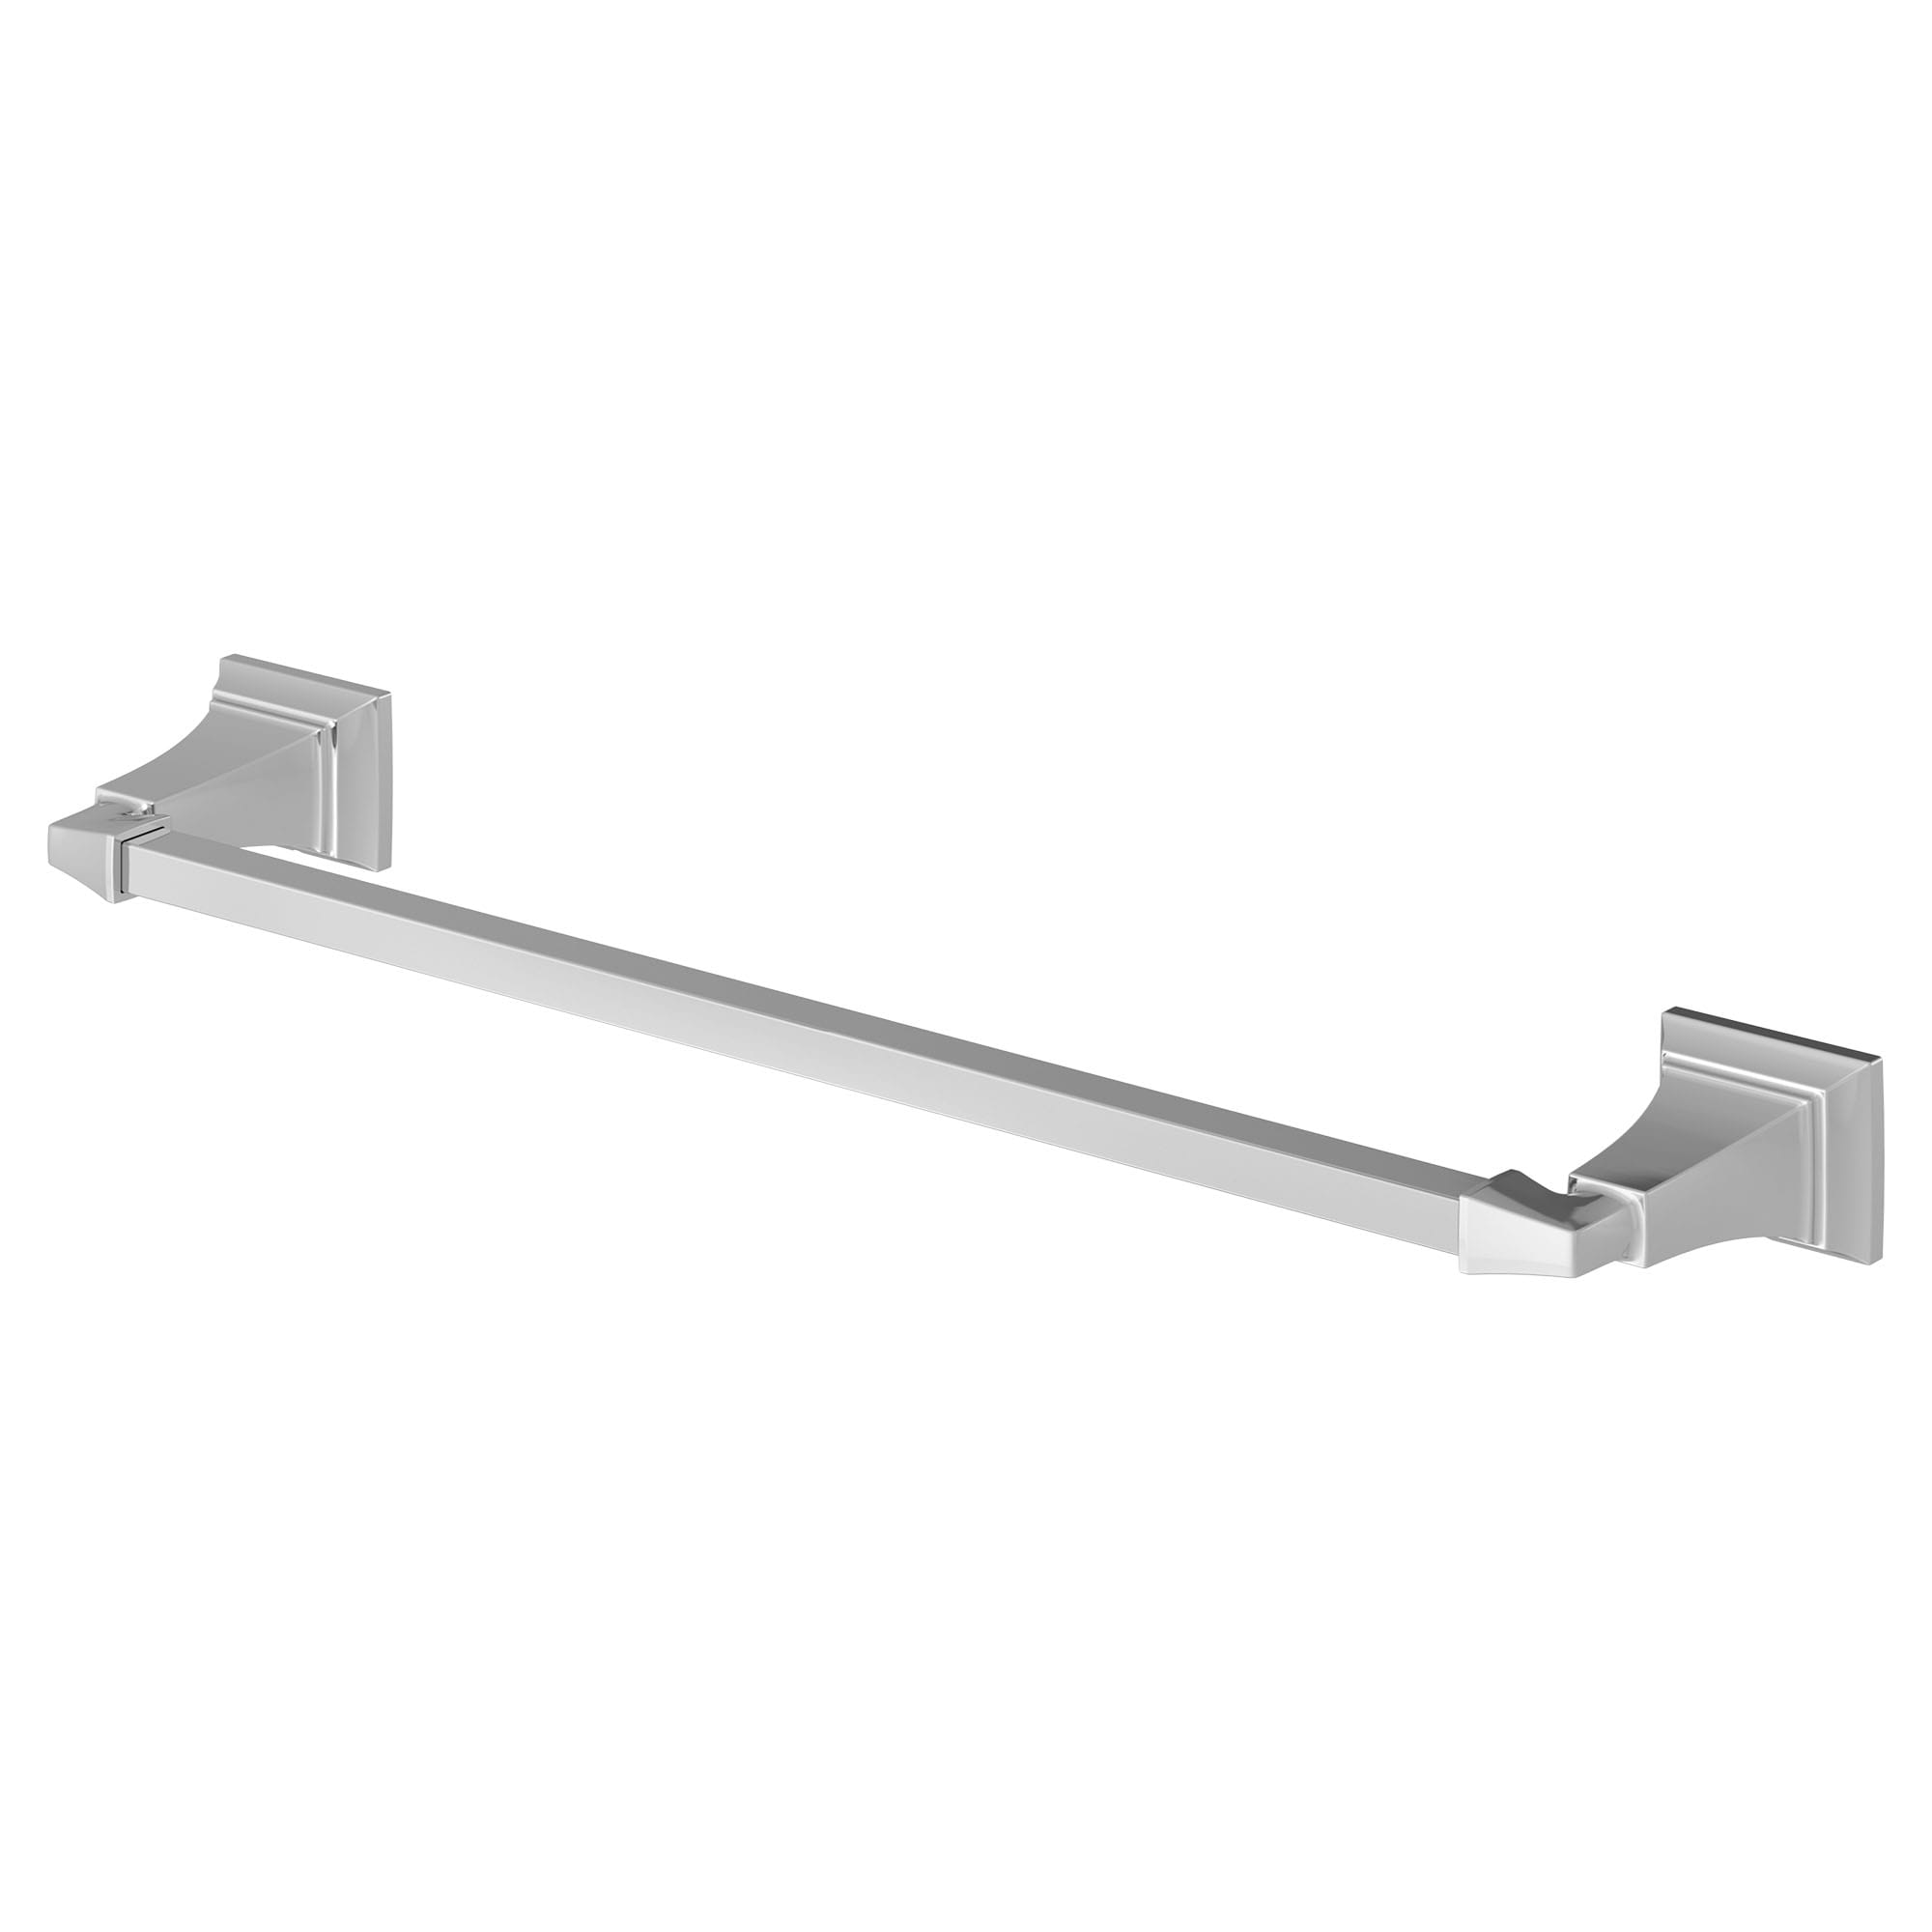 Town Square S 24 Inch Towel Bar CHROME